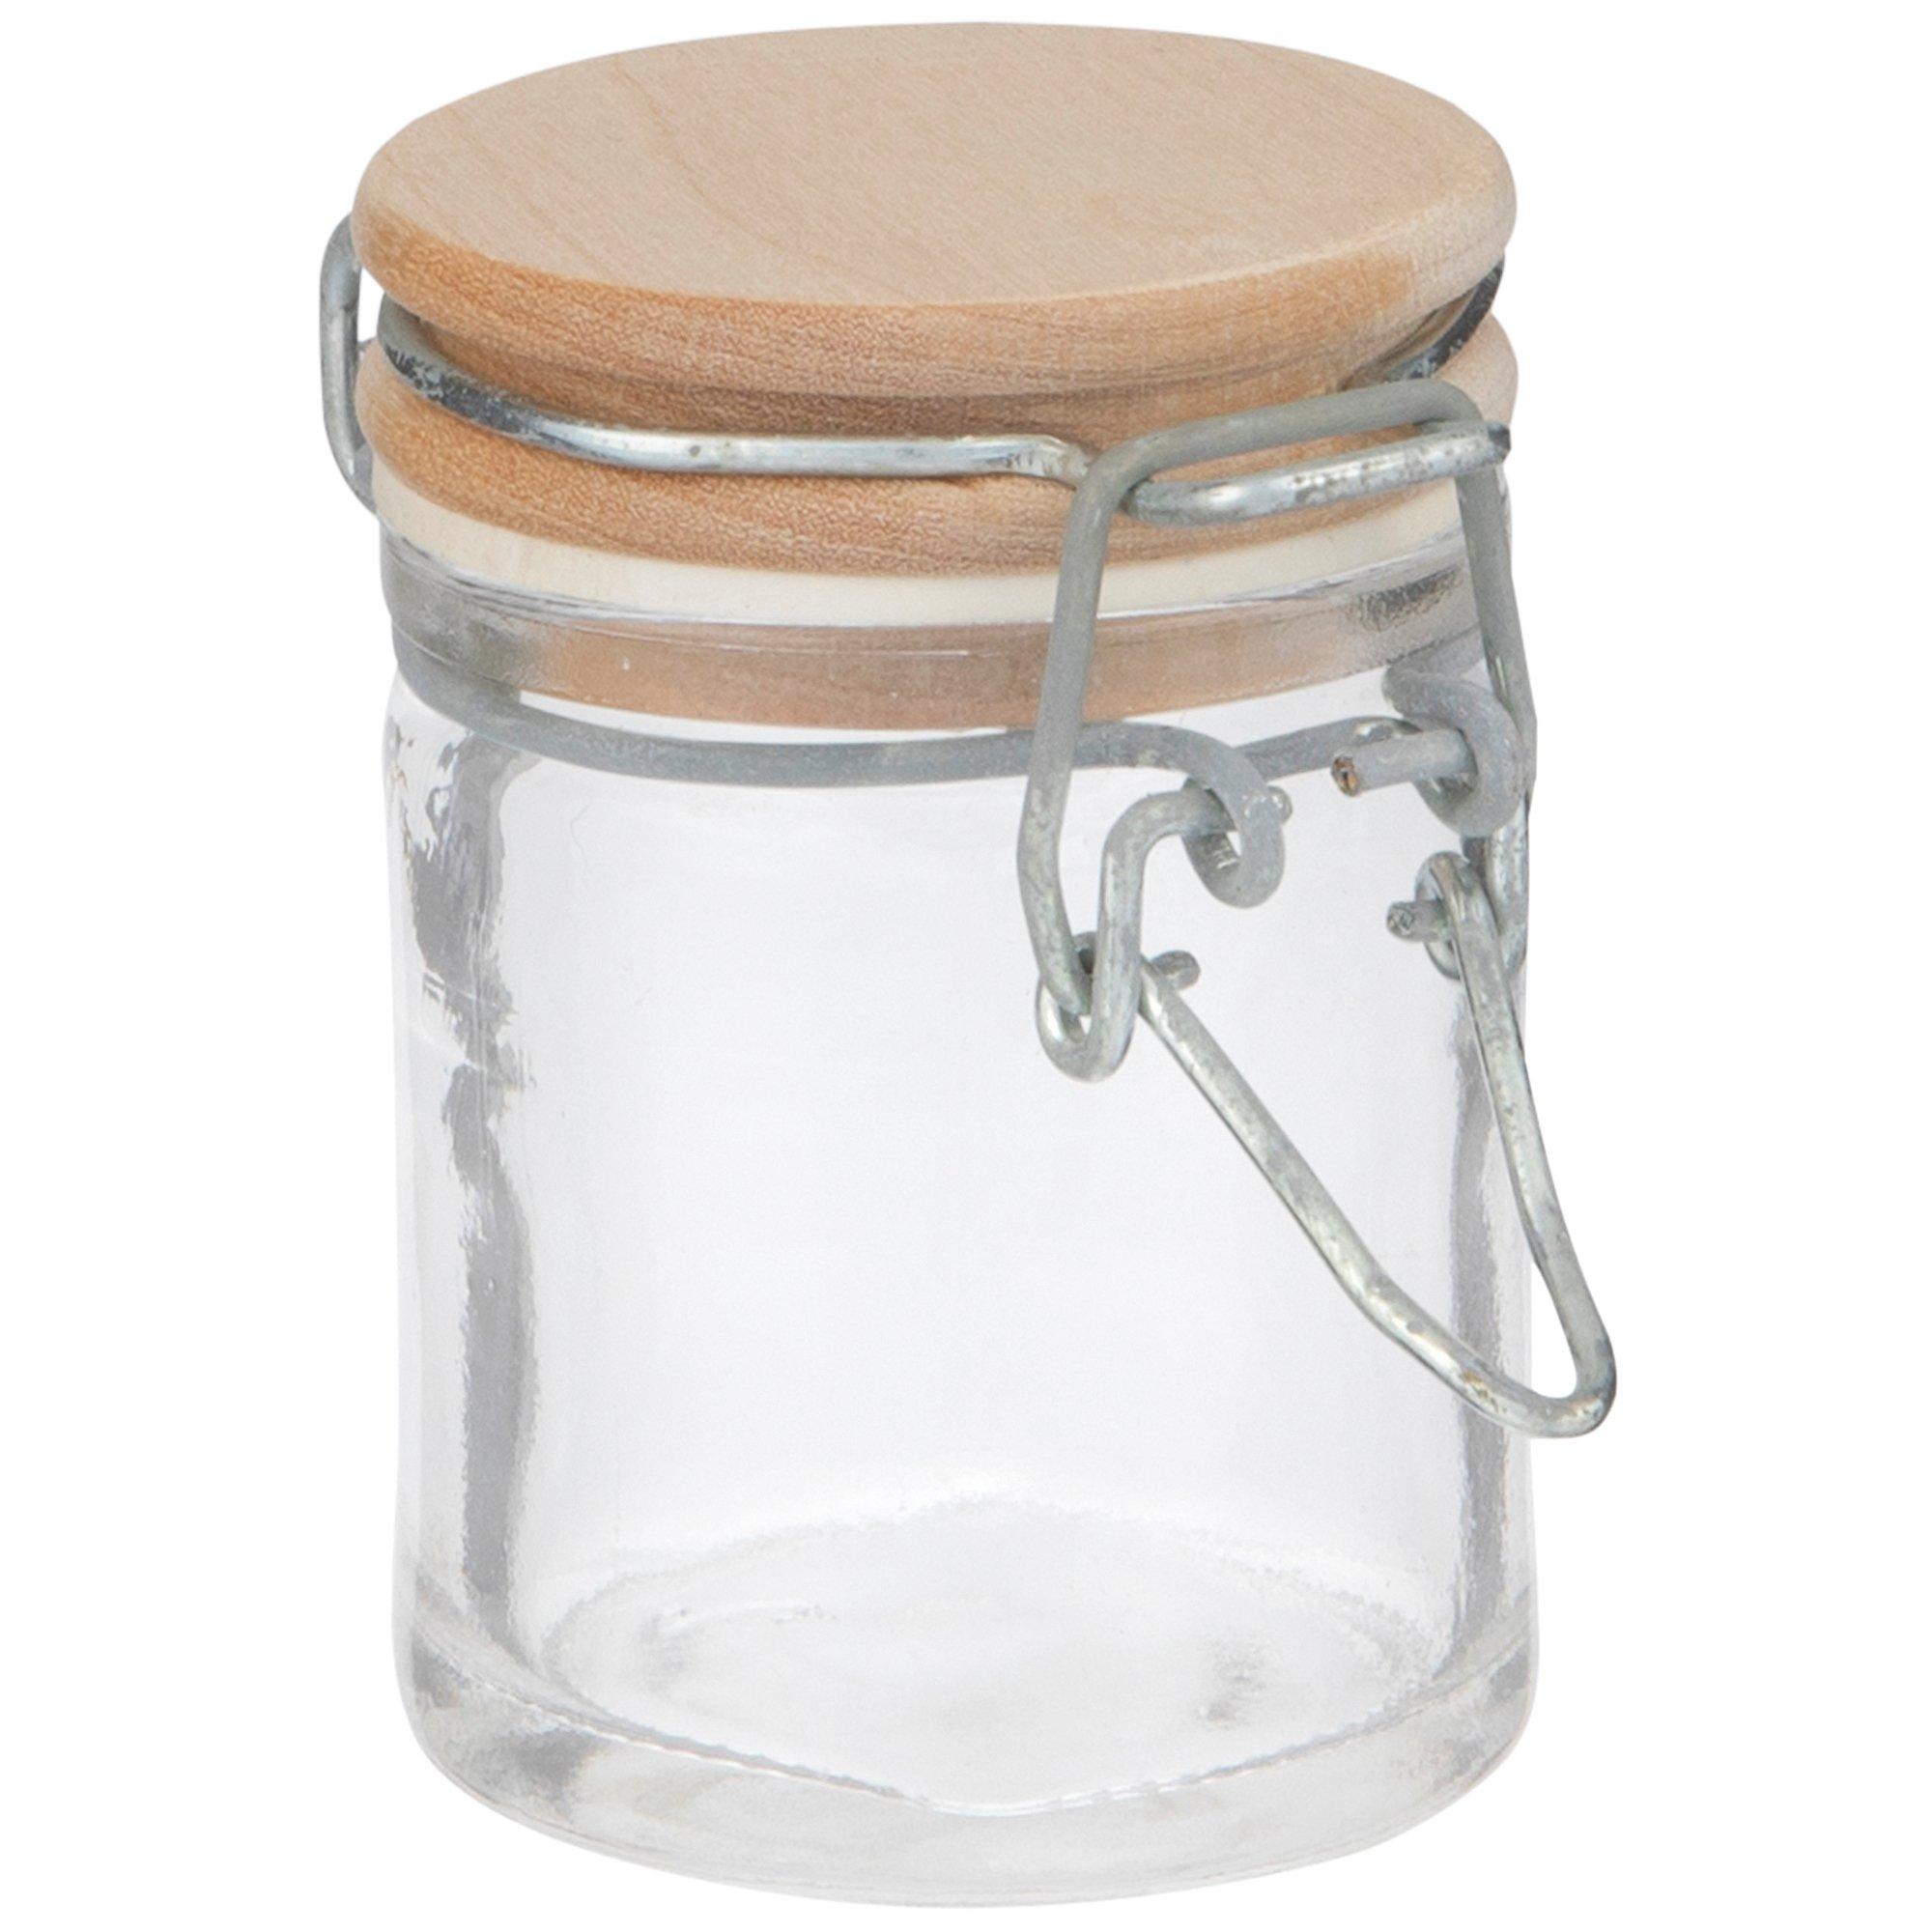 Glass Jar with Wood Lid - Easily See Its Contents - ApolloBox